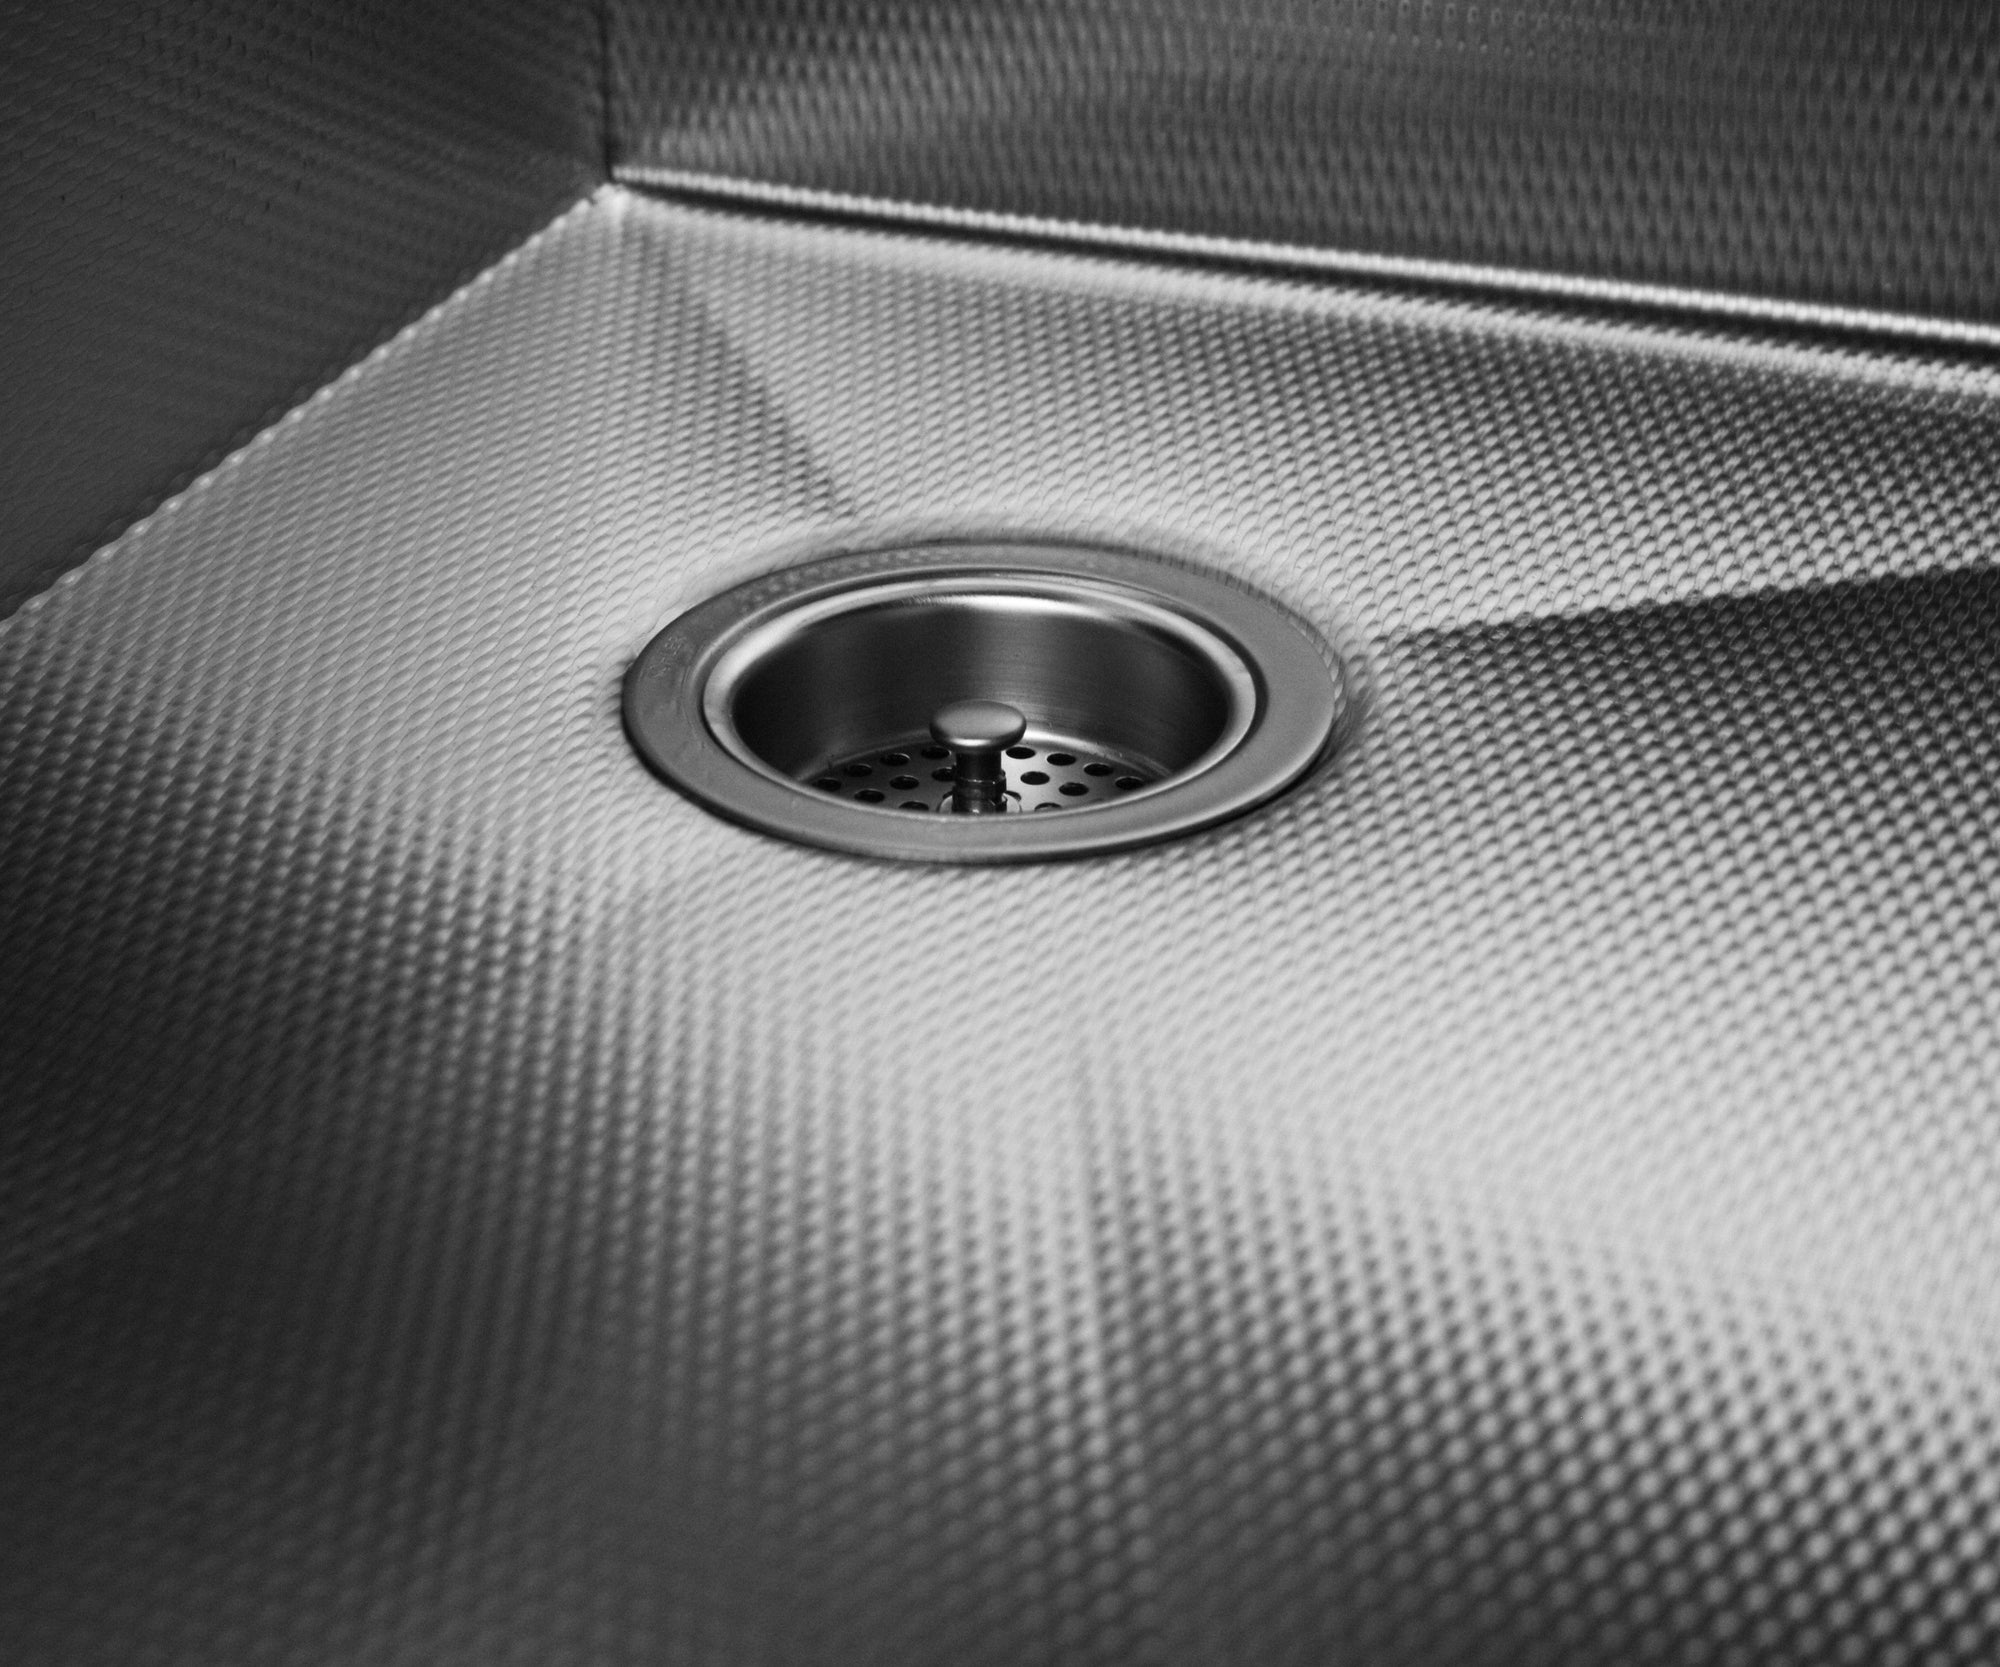 Stainless steel sink with a textured finish and right rear drain.